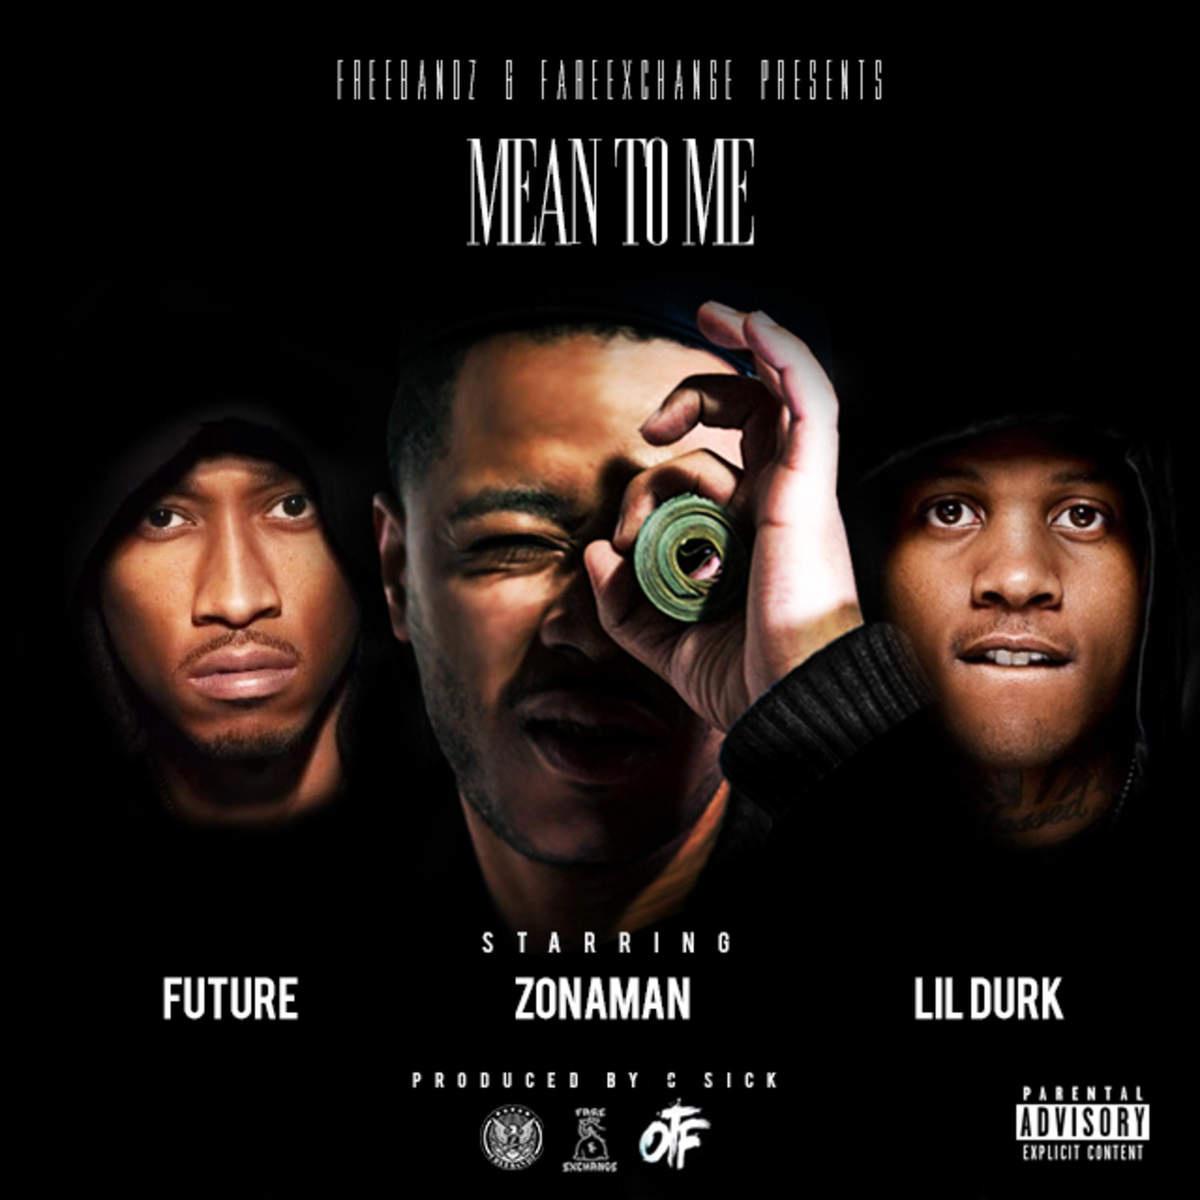 Zona Man - Mean to Me (feat. Future & Lil Durk)